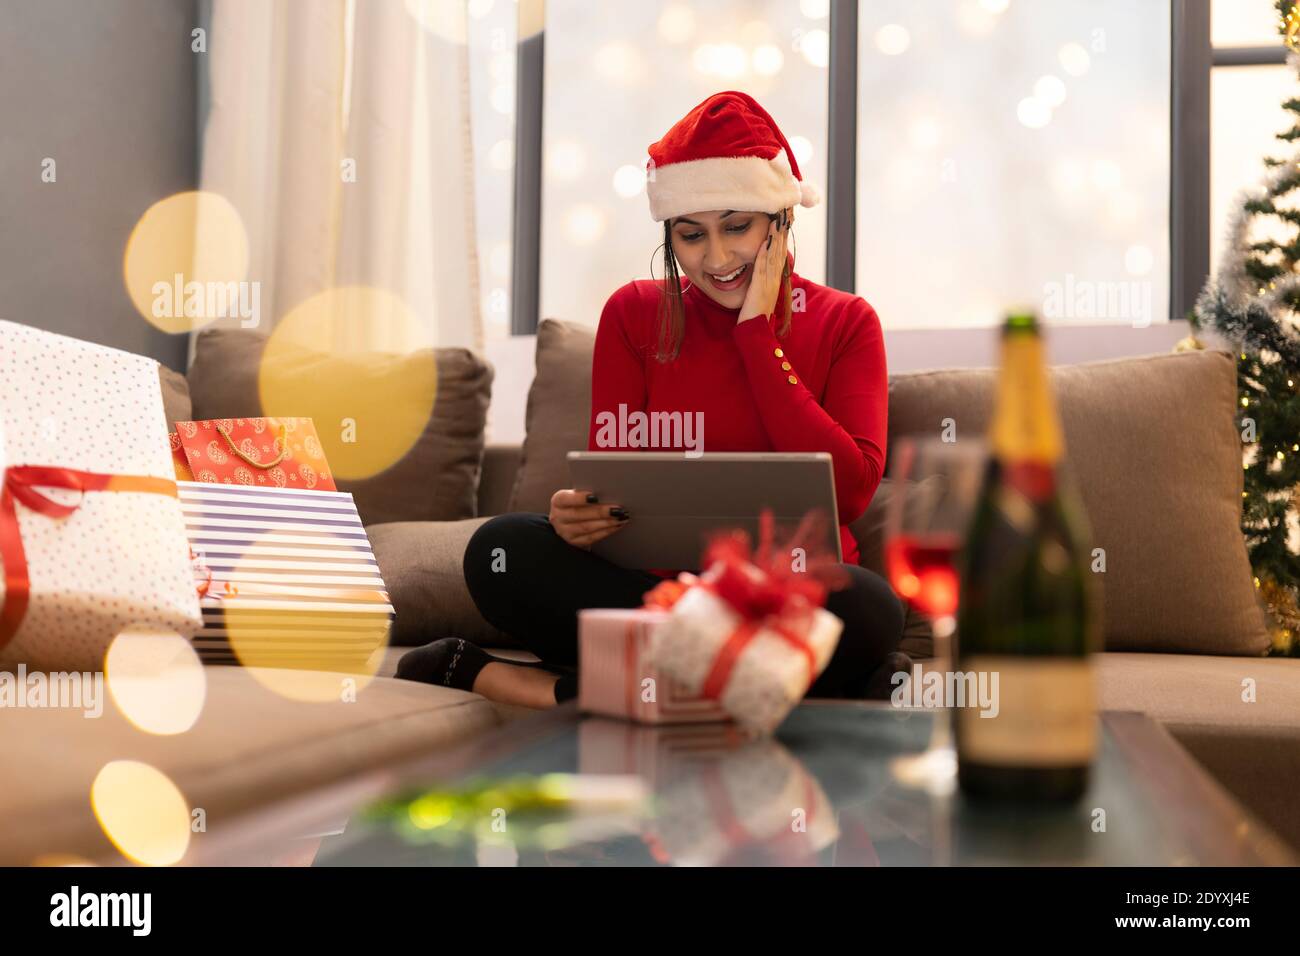 Happy Woman Making Video Call During Christmas Celebration Stock Photo